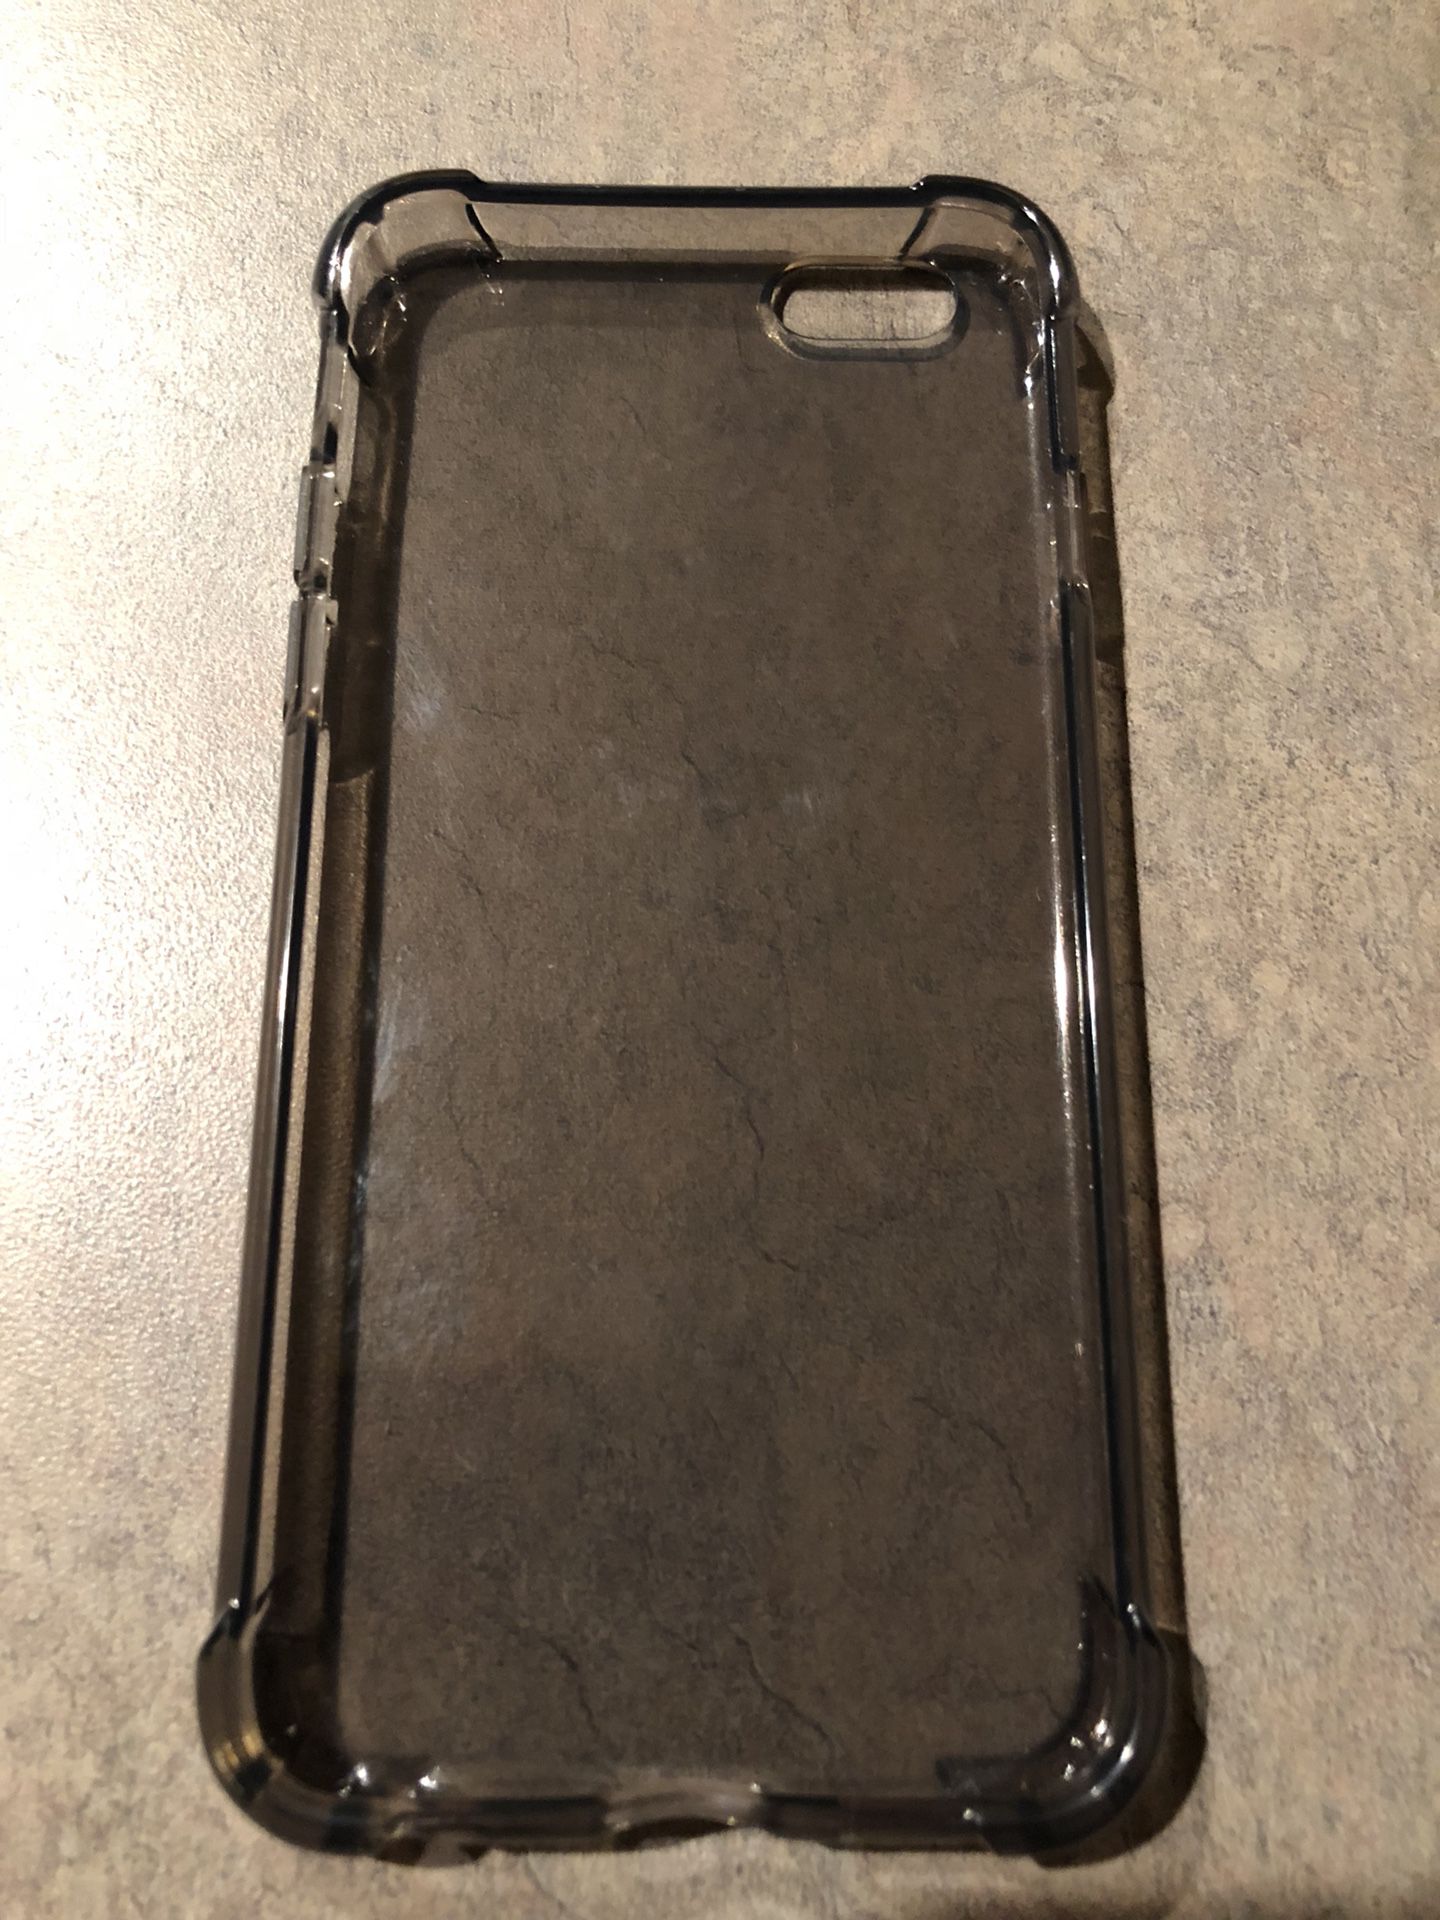 IPhone 6/6s Case (*BASICALLY NEW - USED ONE TIME*)